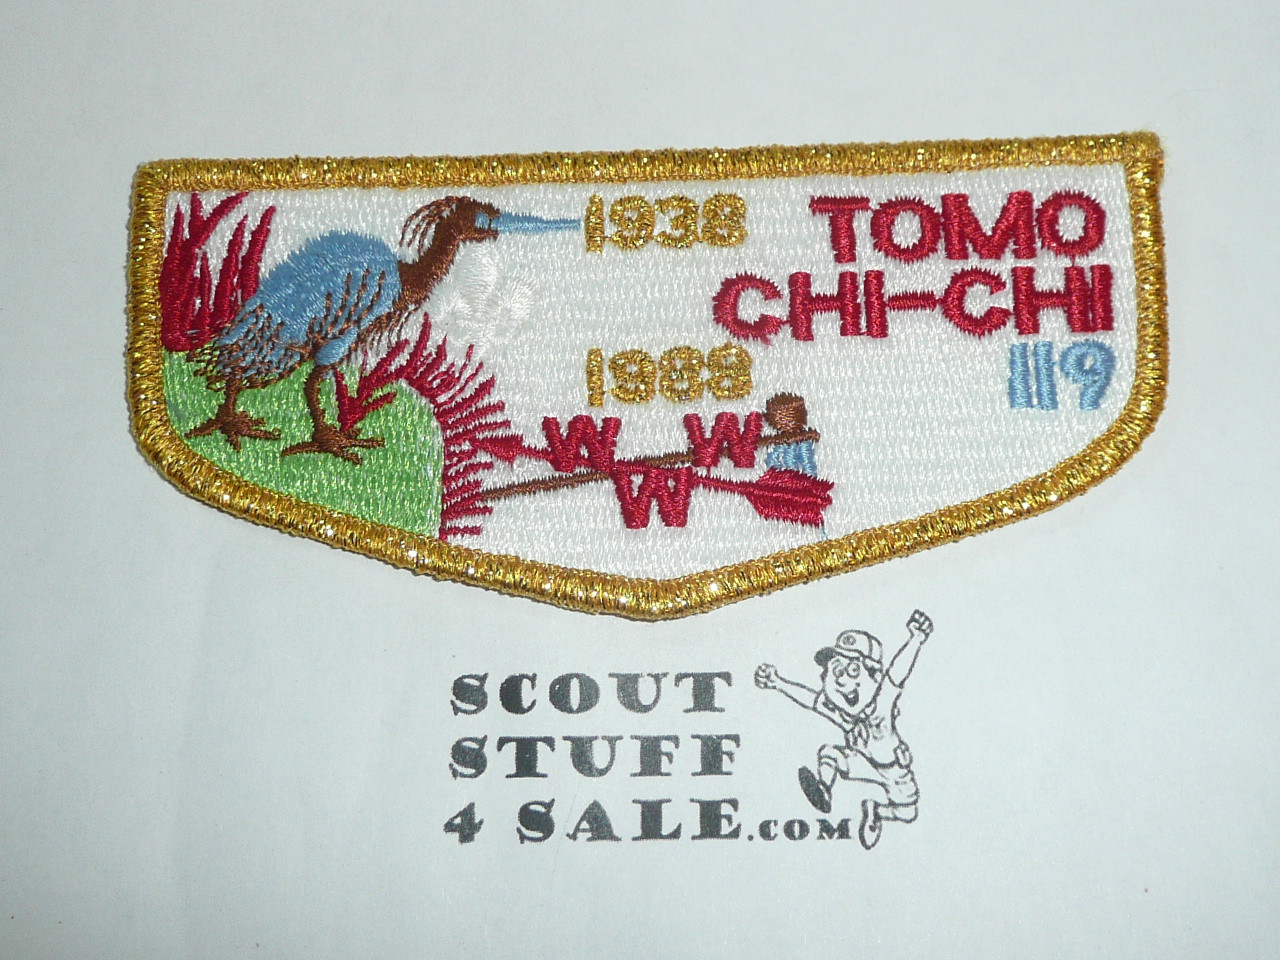 Order of the Arrow Lodge #119 Tomo Chi-Chi s20 50th Anniversary Flap Patch